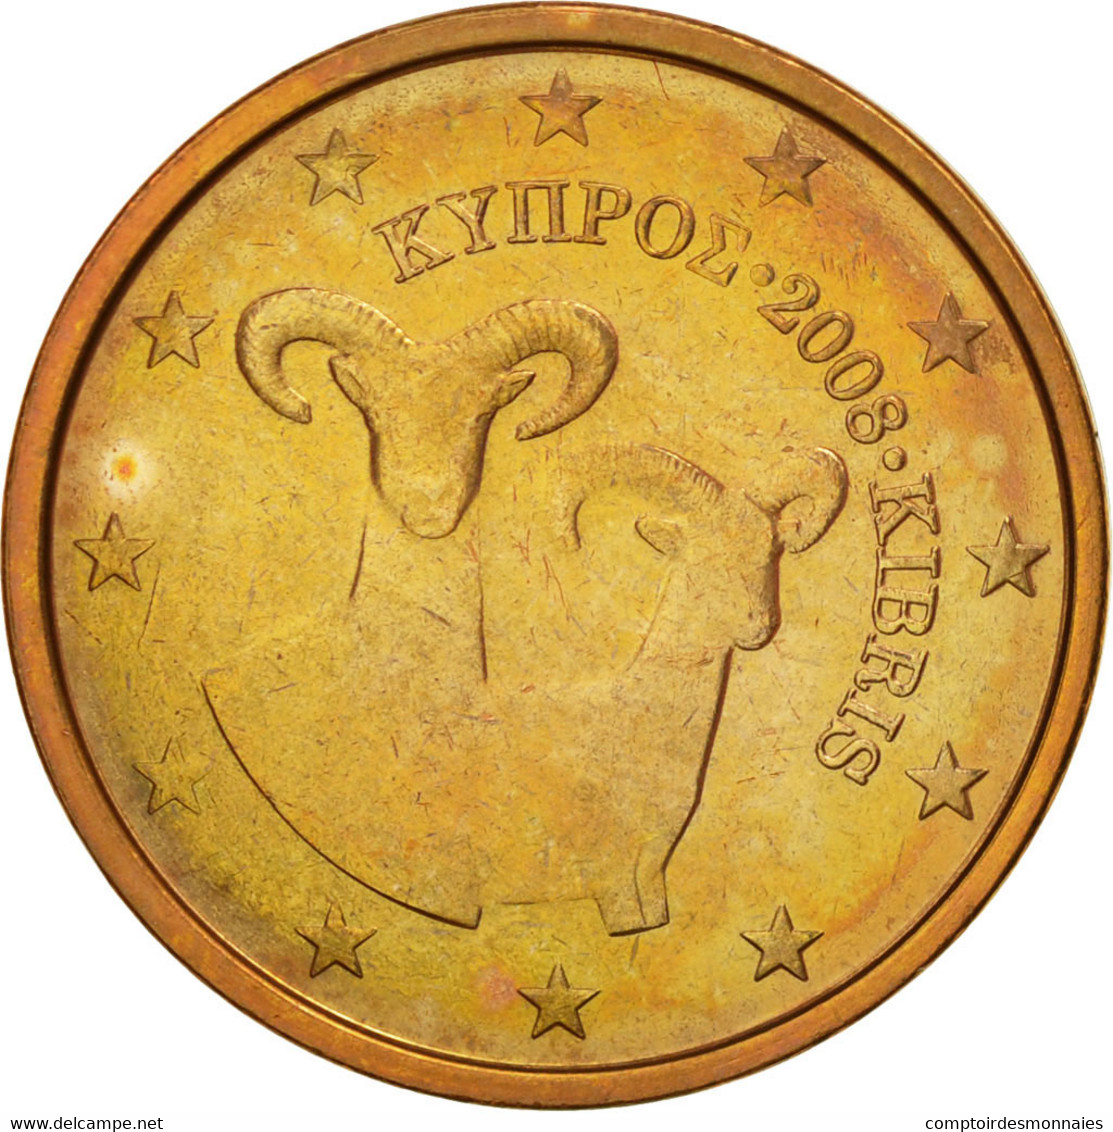 Chypre, 2 Euro Cent, 2008, SUP, Copper Plated Steel, KM:79 - Zypern